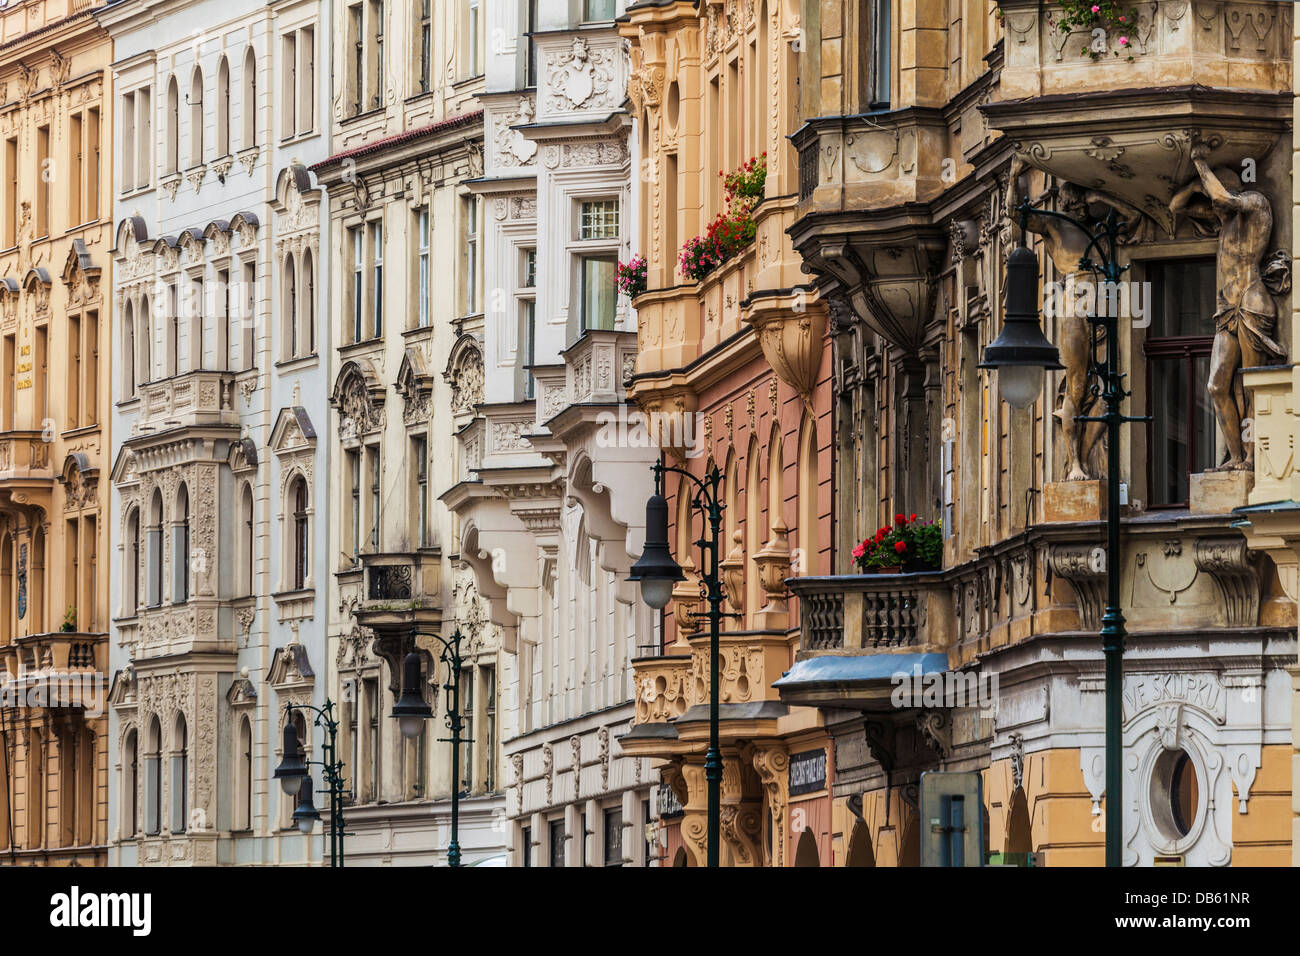 Facades of ornate buildings showing various architectural styles in Siroka Street, in the Jozefov district of Prague. Stock Photo